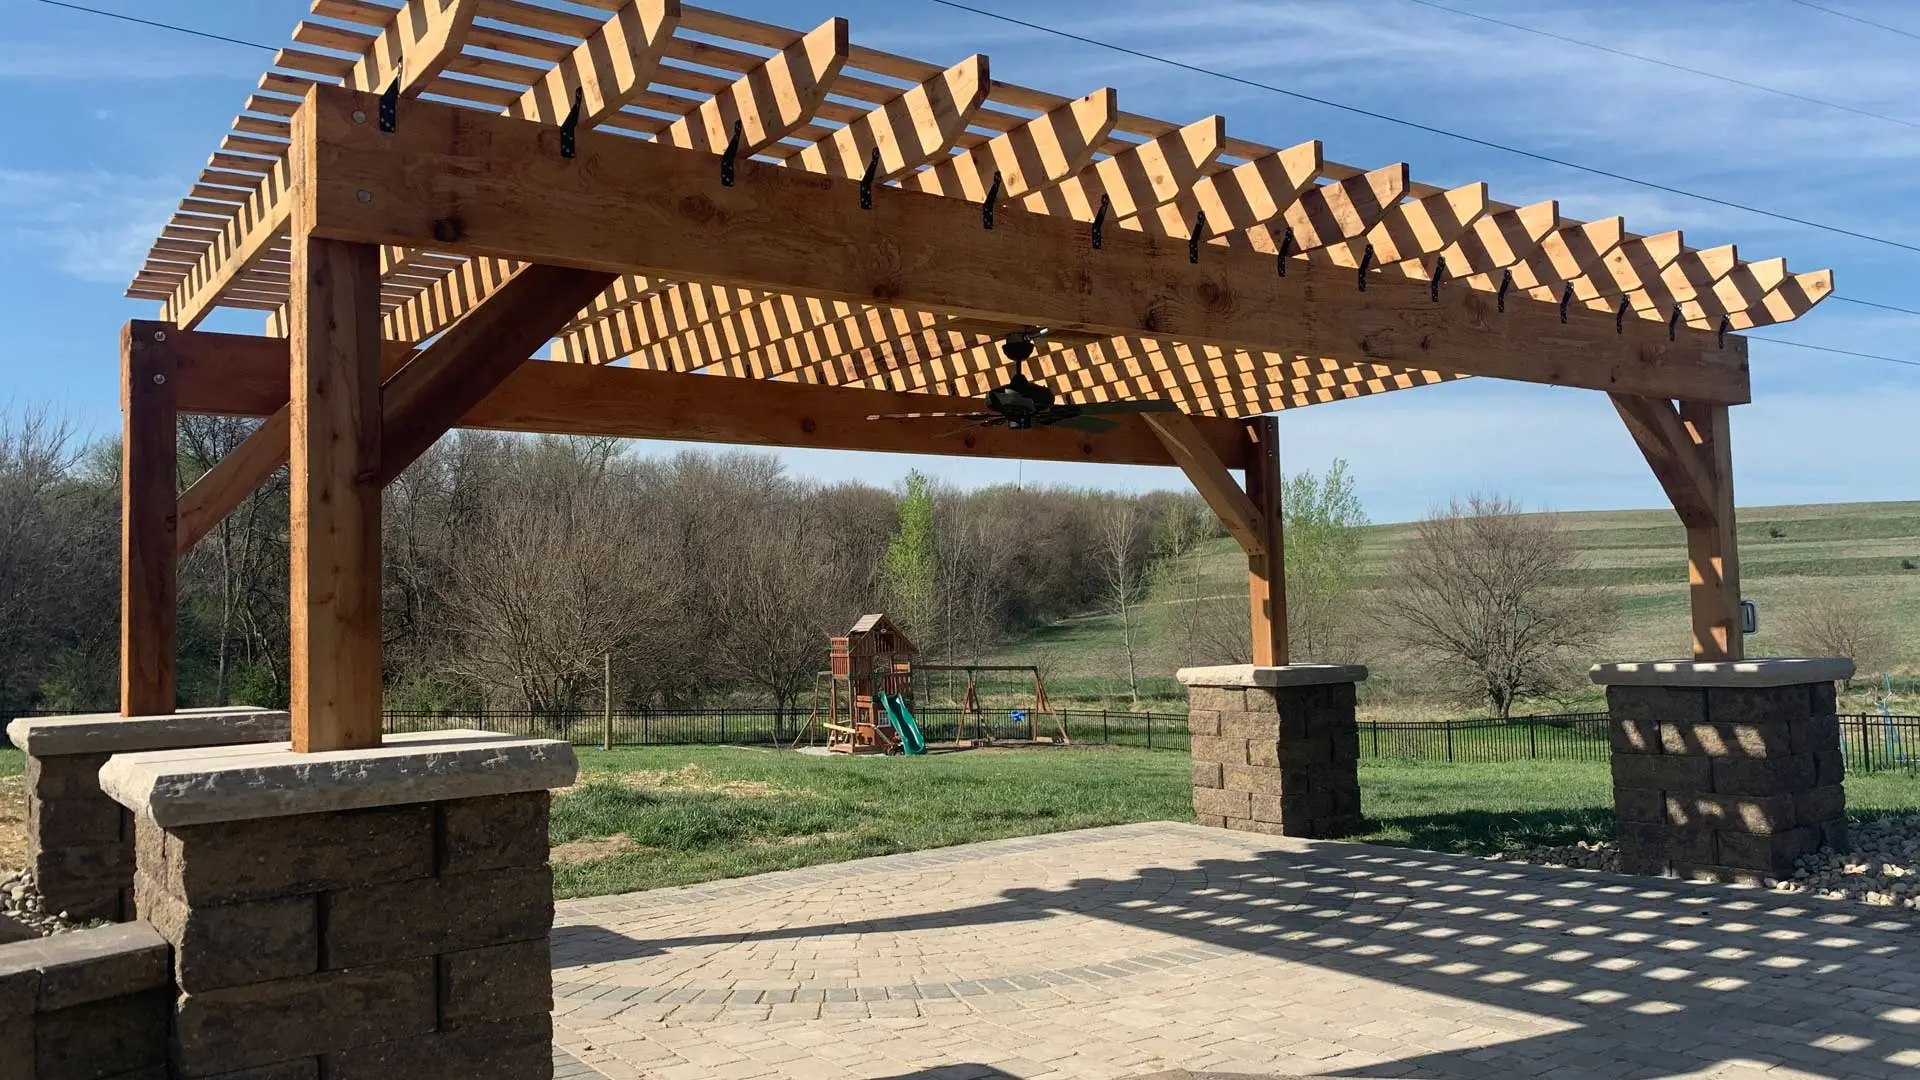 Pergola installed over a patio project in Omaha, NE.